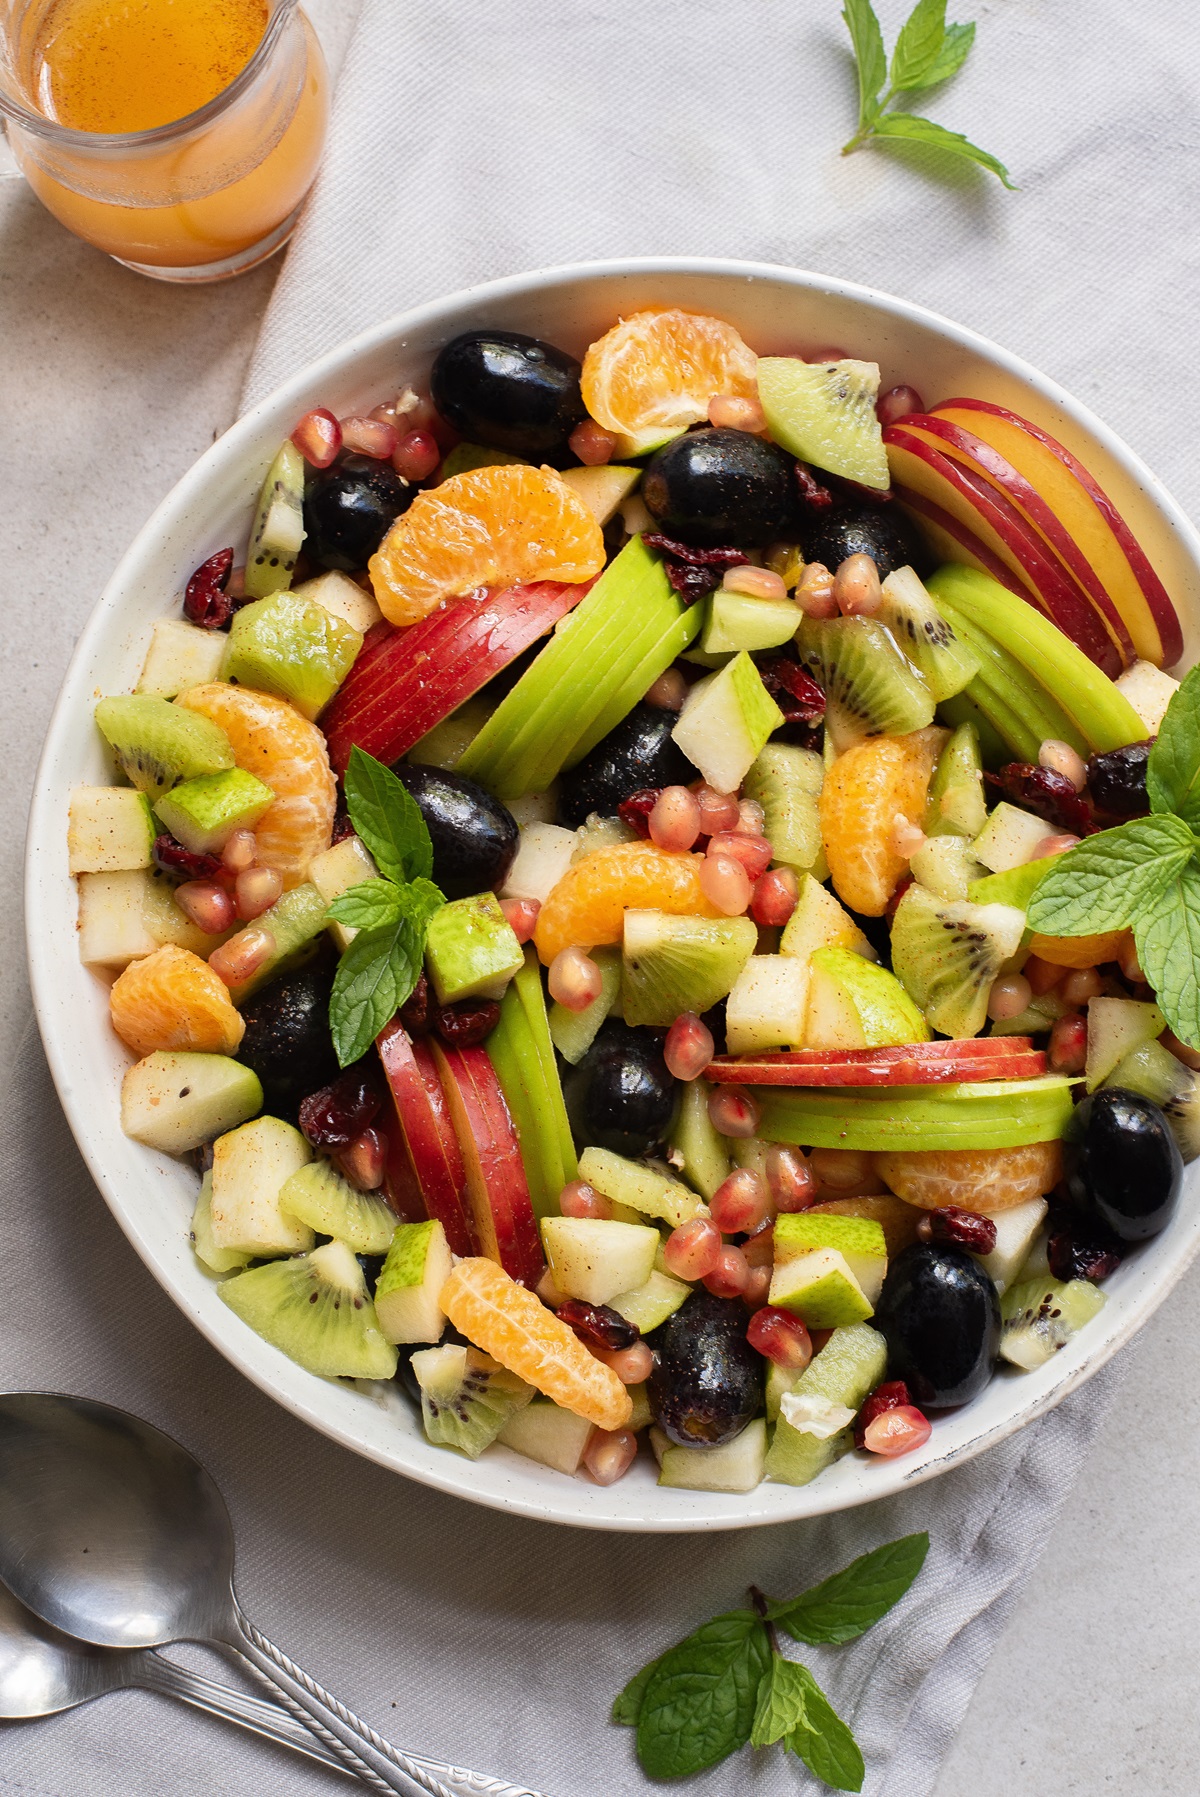 Round bowl with fruit in it.